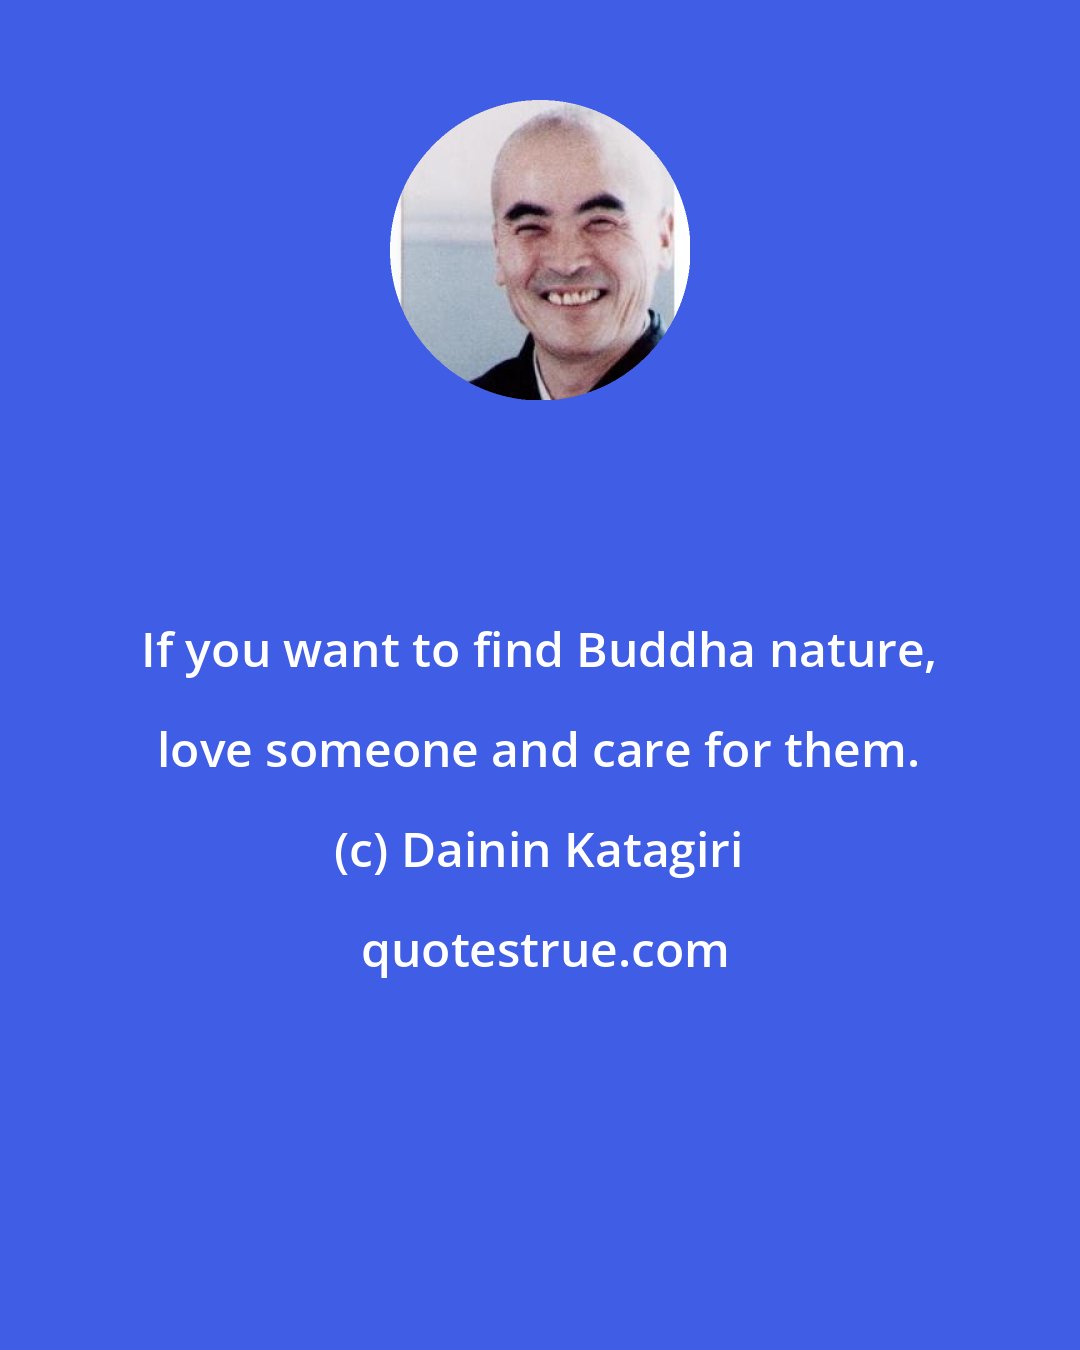 Dainin Katagiri: If you want to find Buddha nature, love someone and care for them.